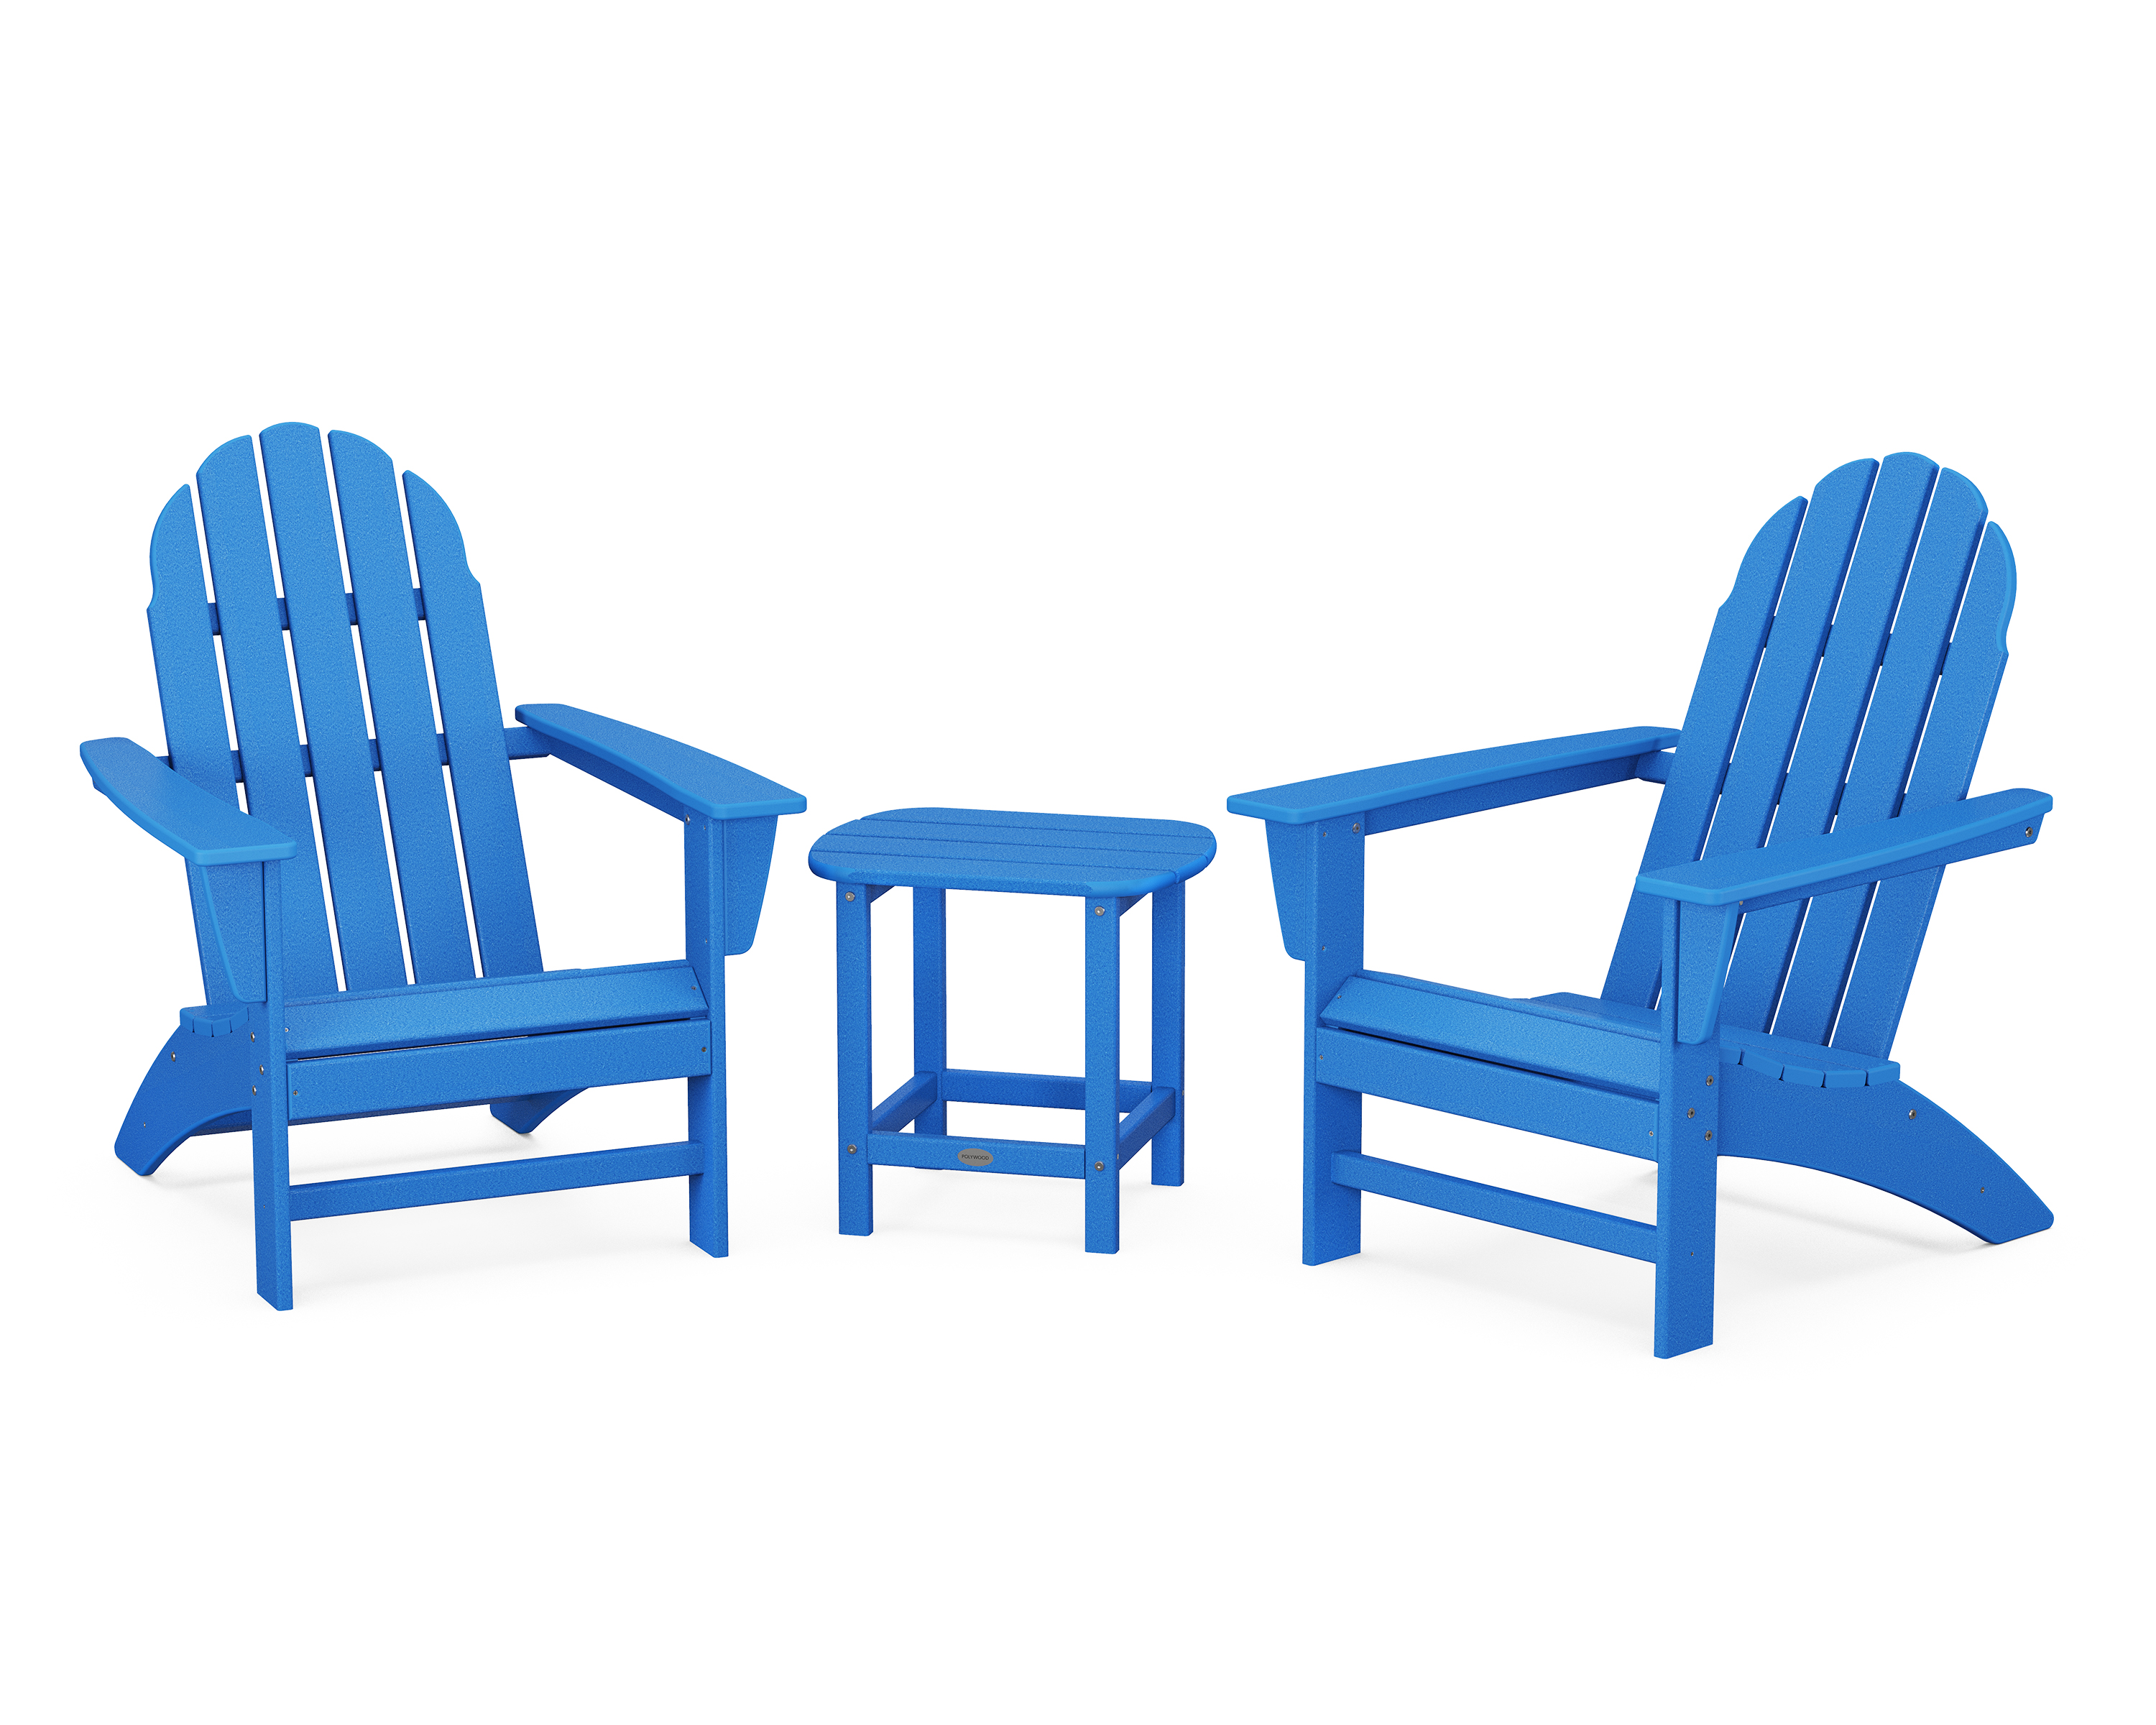 POLYWOOD Vineyard 3-Piece Adirondack Set with South Beach 18" Side Table in Pacific Blue - image 1 of 1